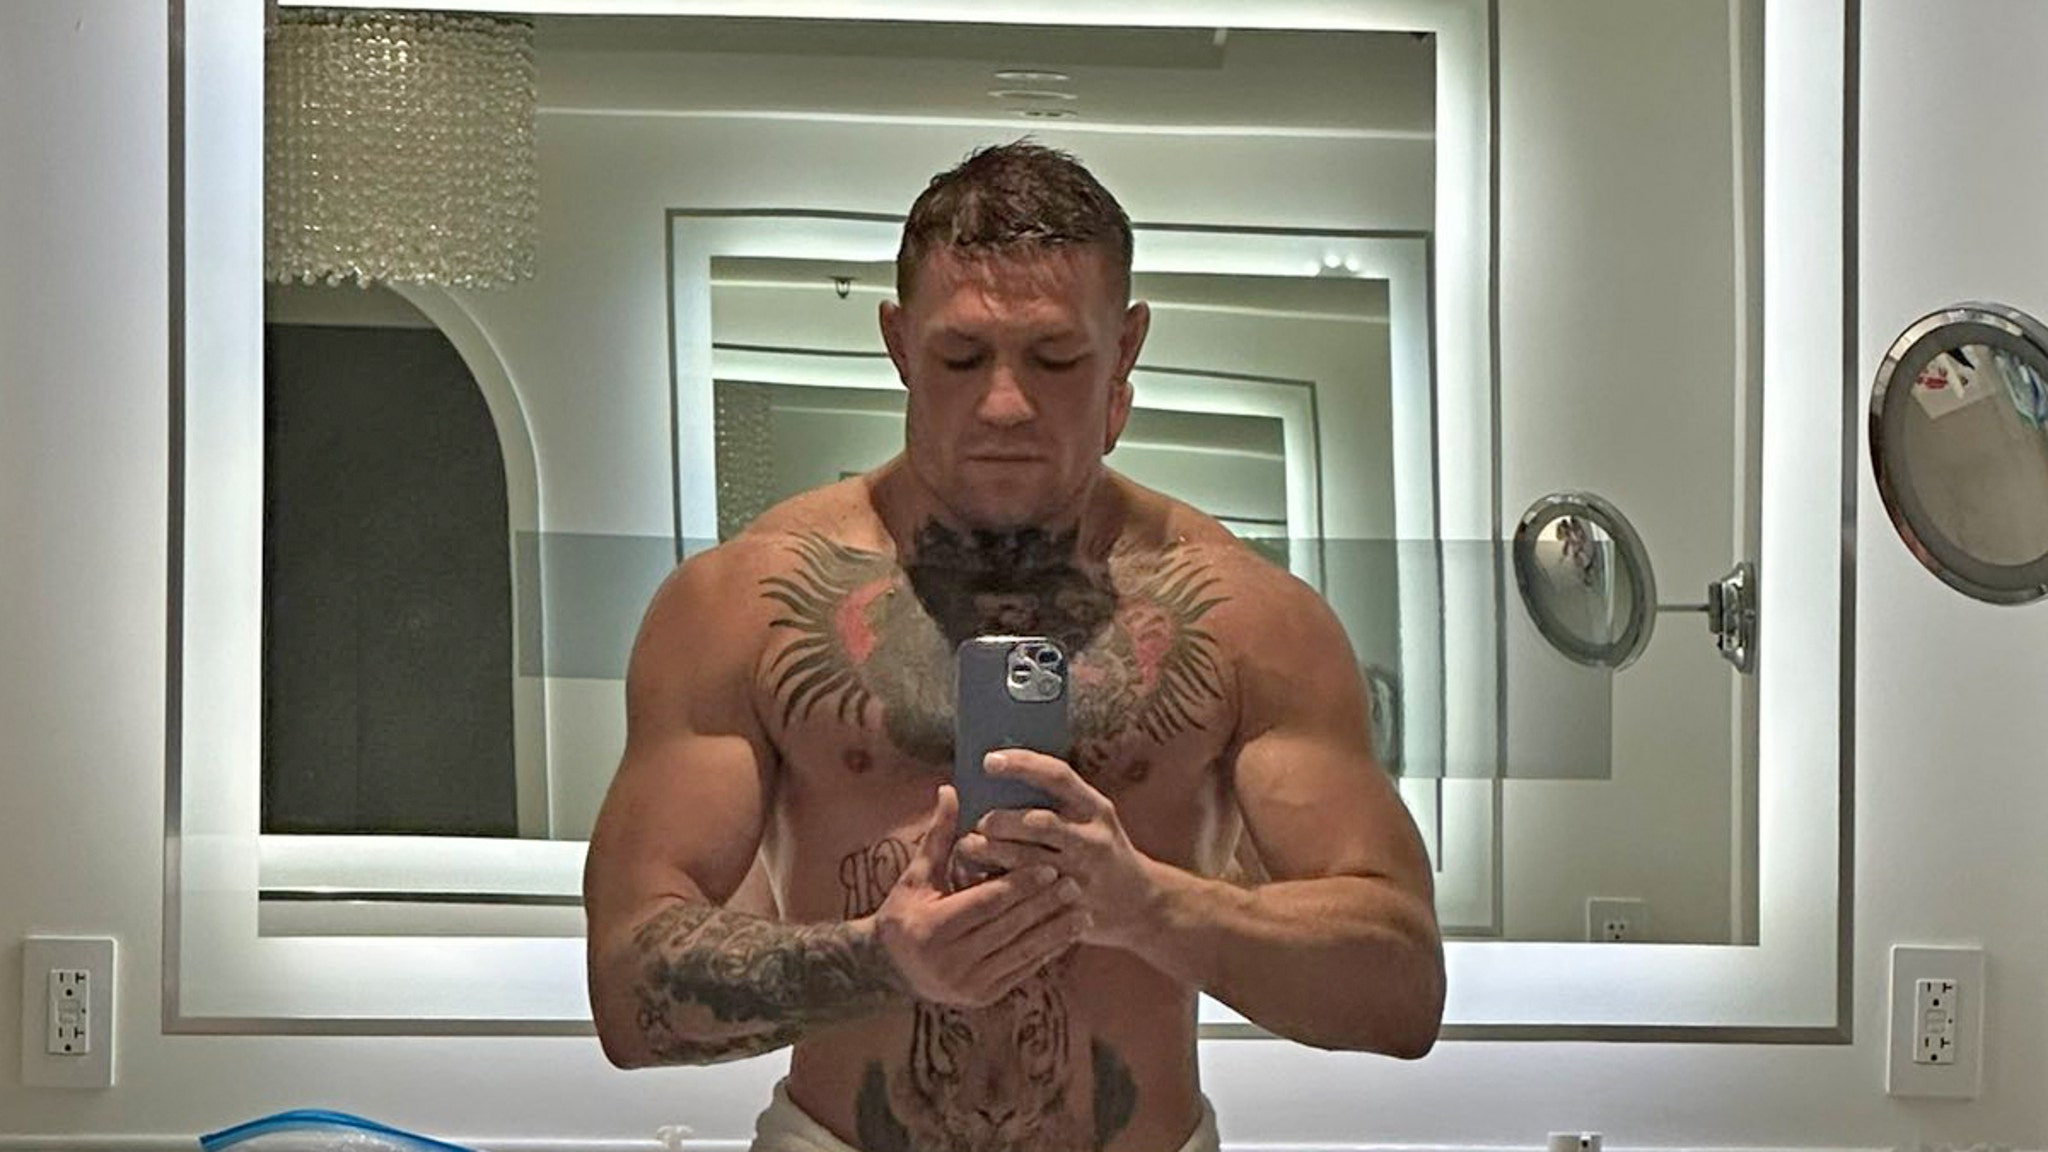 Conor McGregor shows off three-year body transformation with bulky